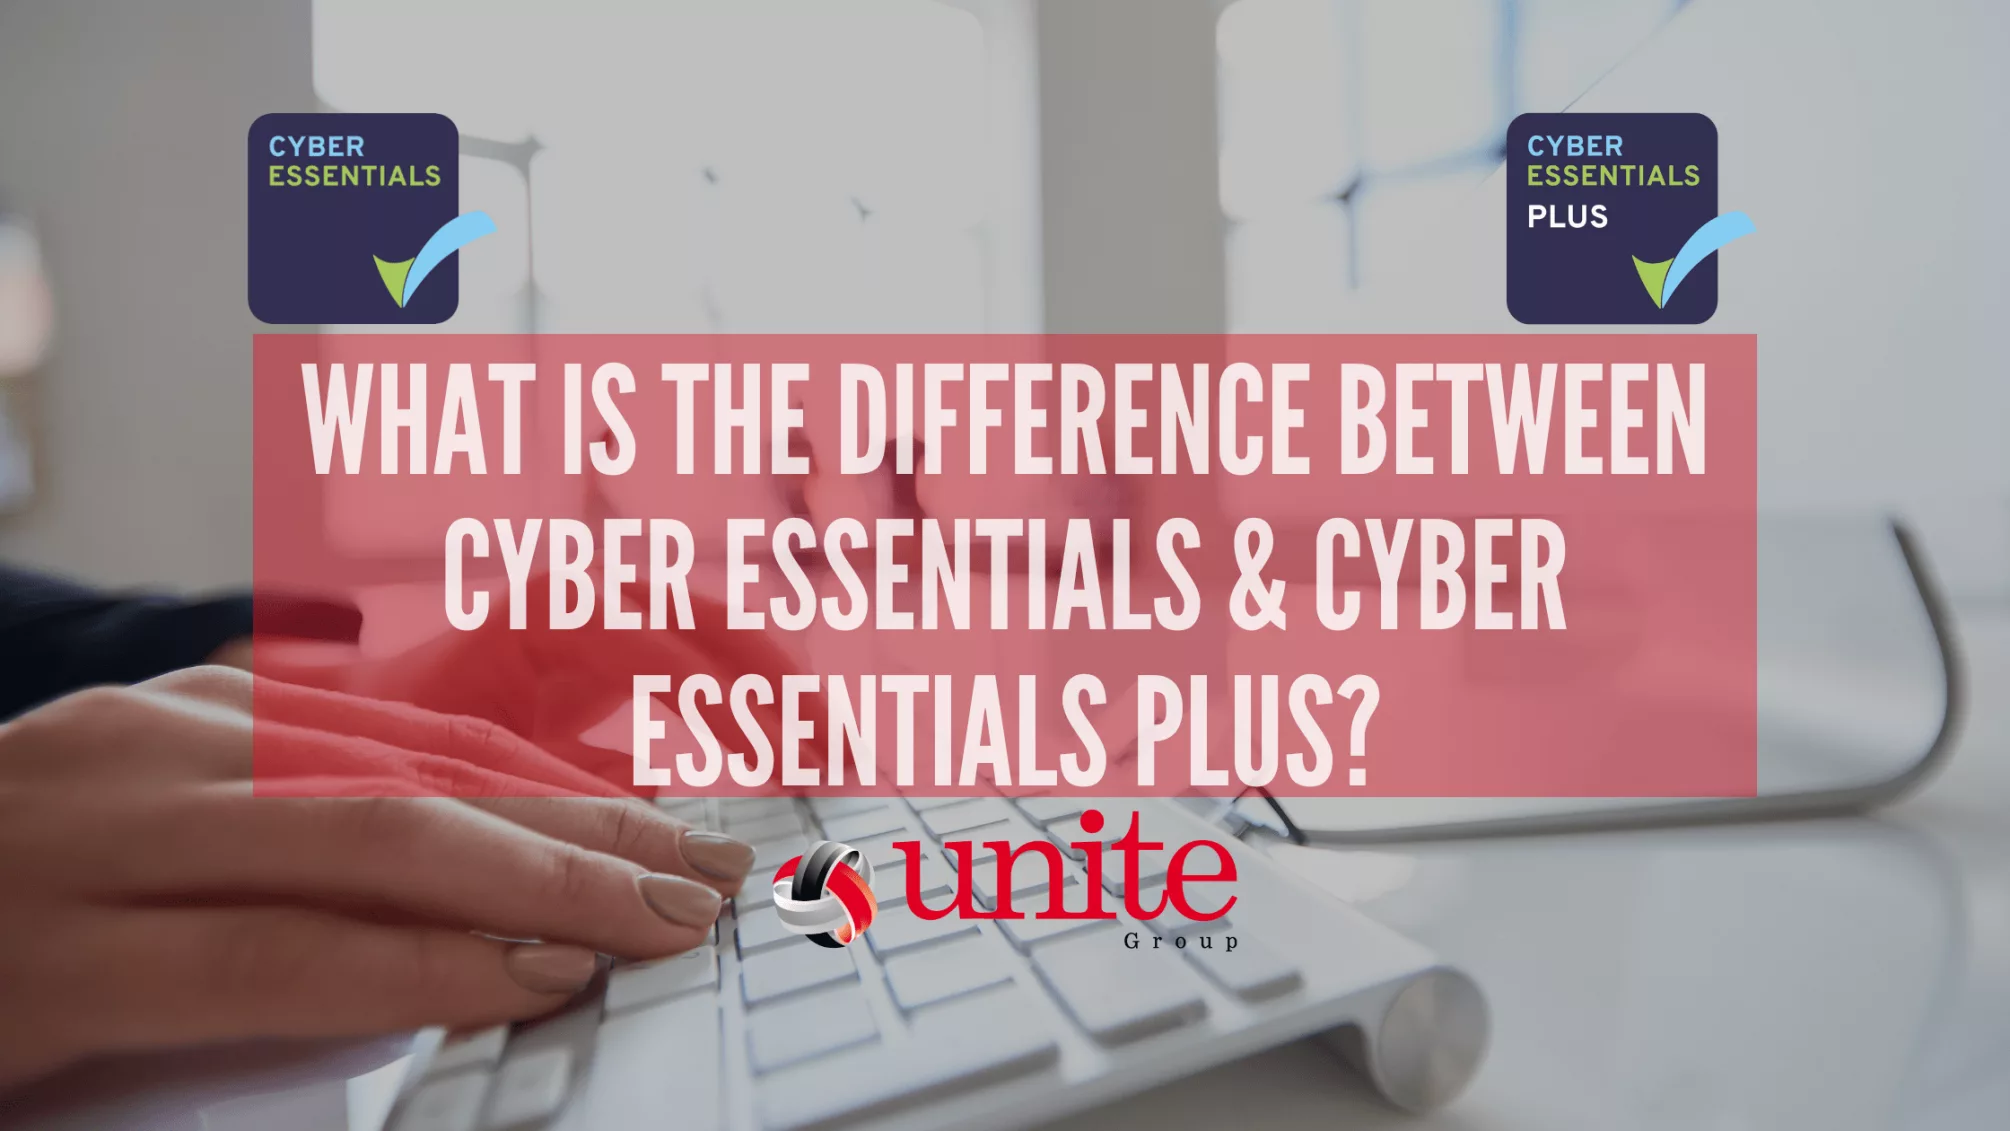 What Is The Difference Between Cyber Essentials And Cyber Essentials Plus